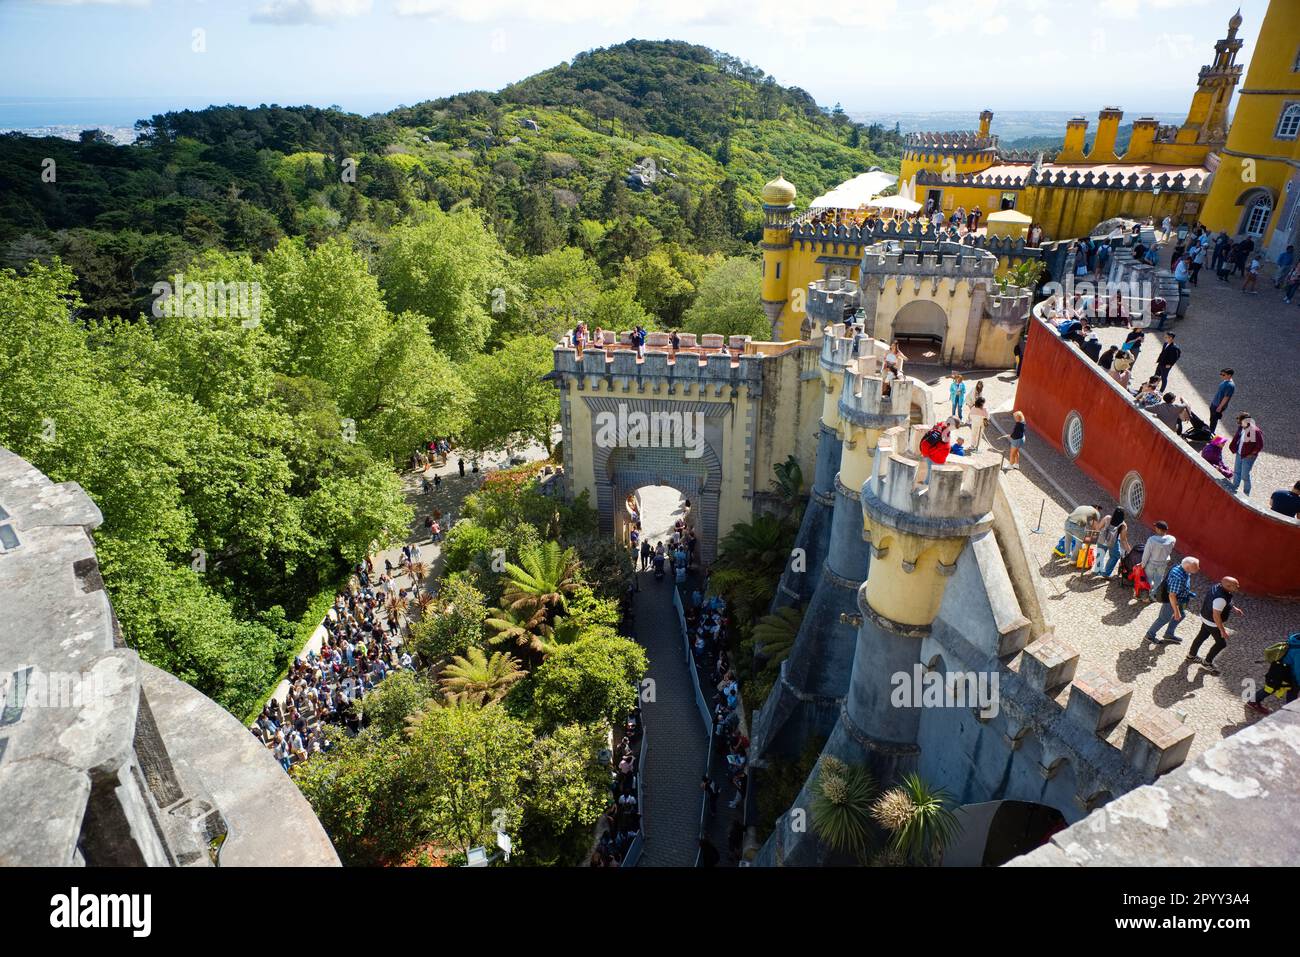 Looking down on the queue at the Pena Palace, Sintra Stock Photo